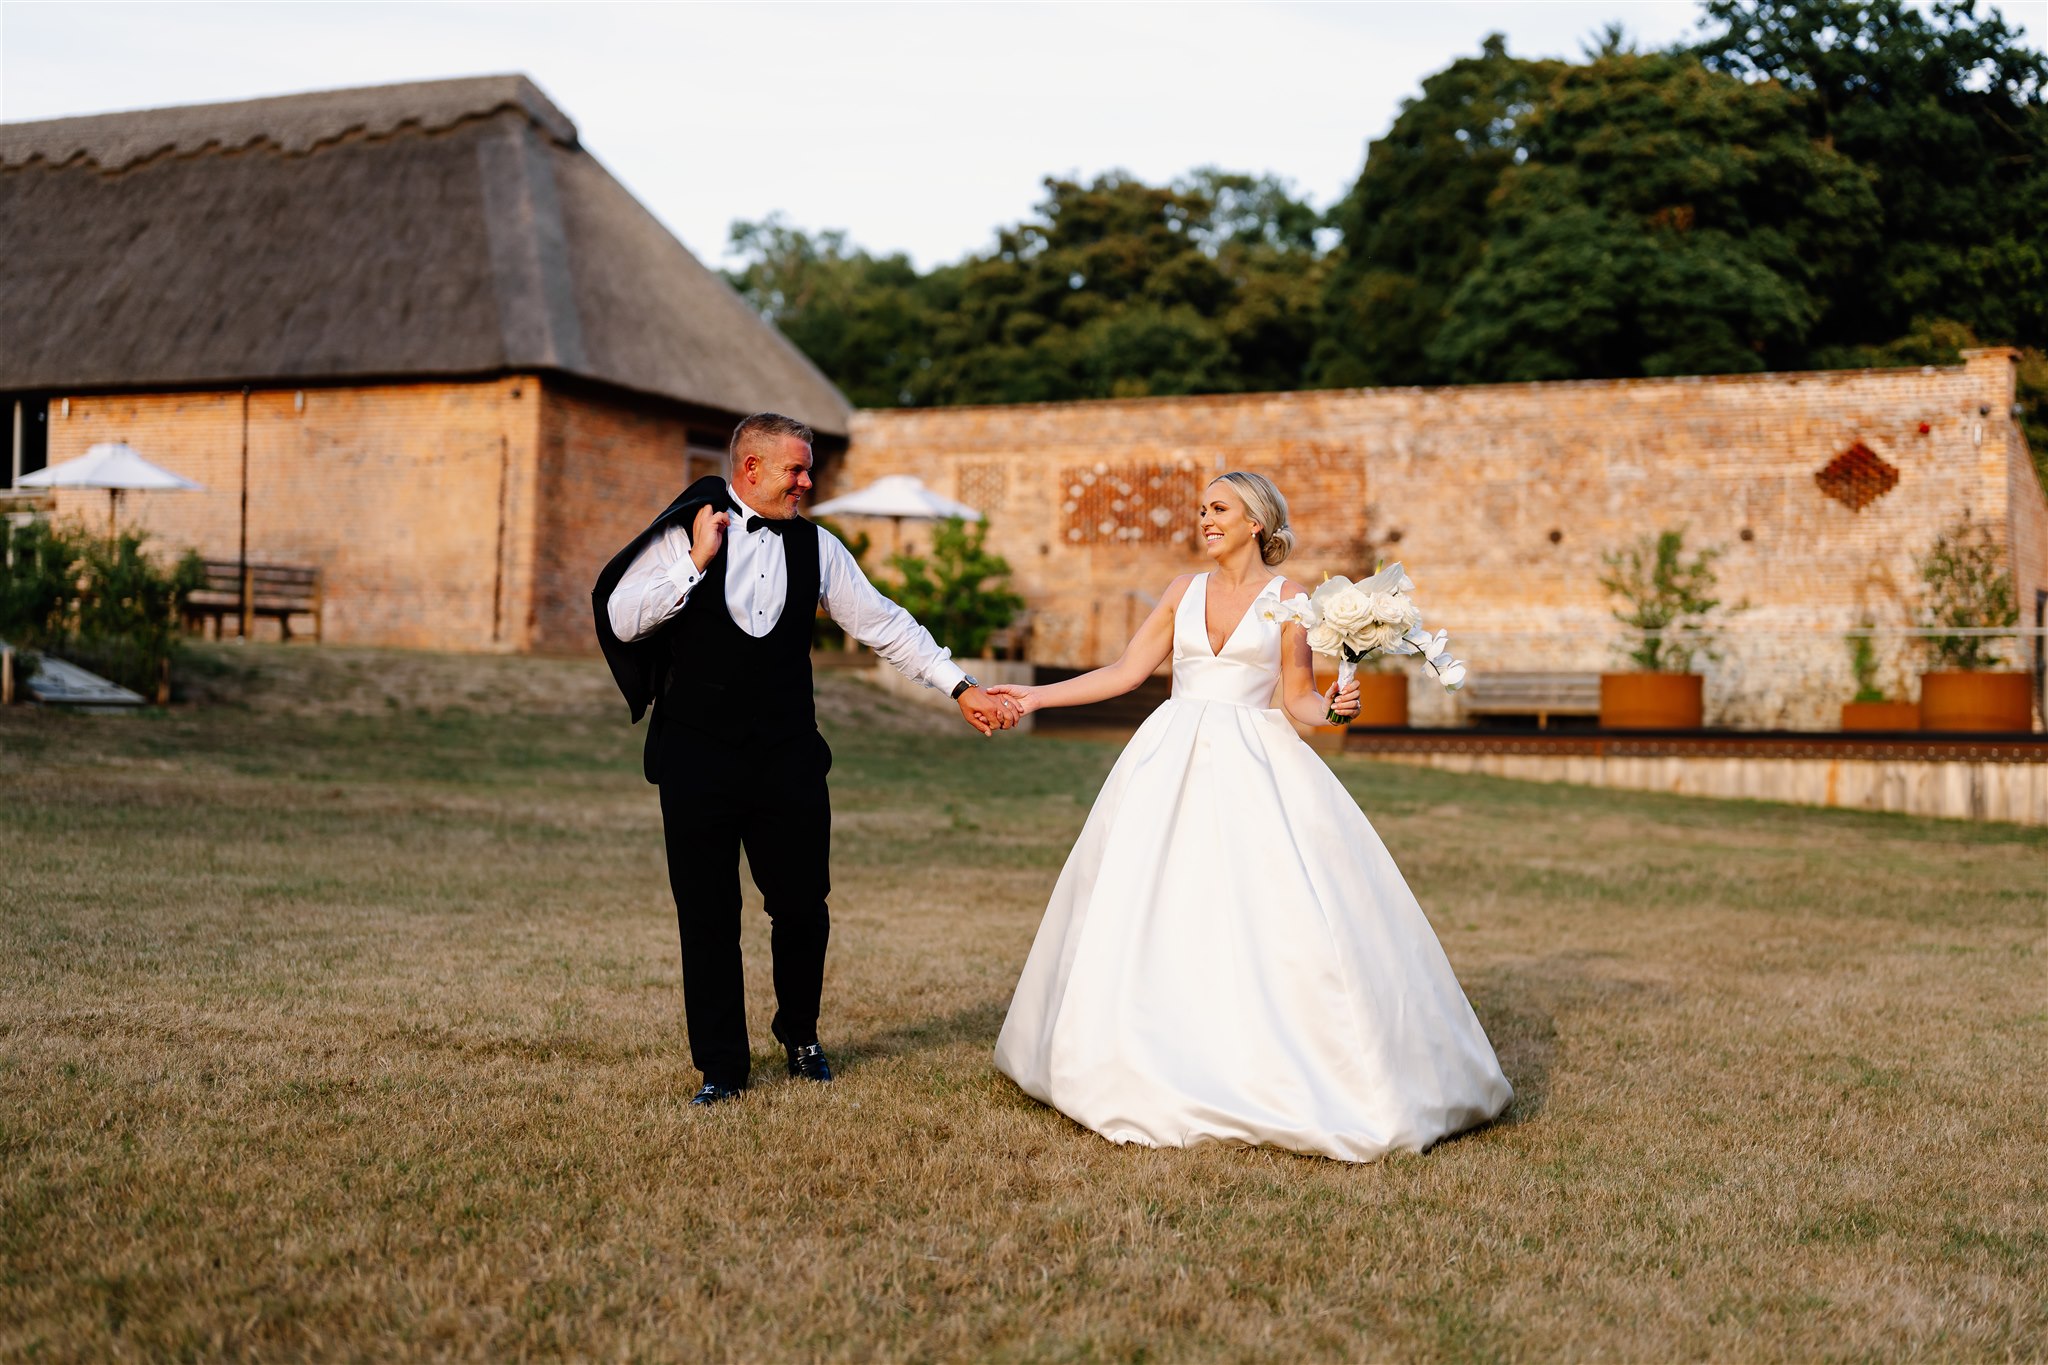 Jimmy Choo Pearl Shoes at The Tythe Barn Rustic Wedding